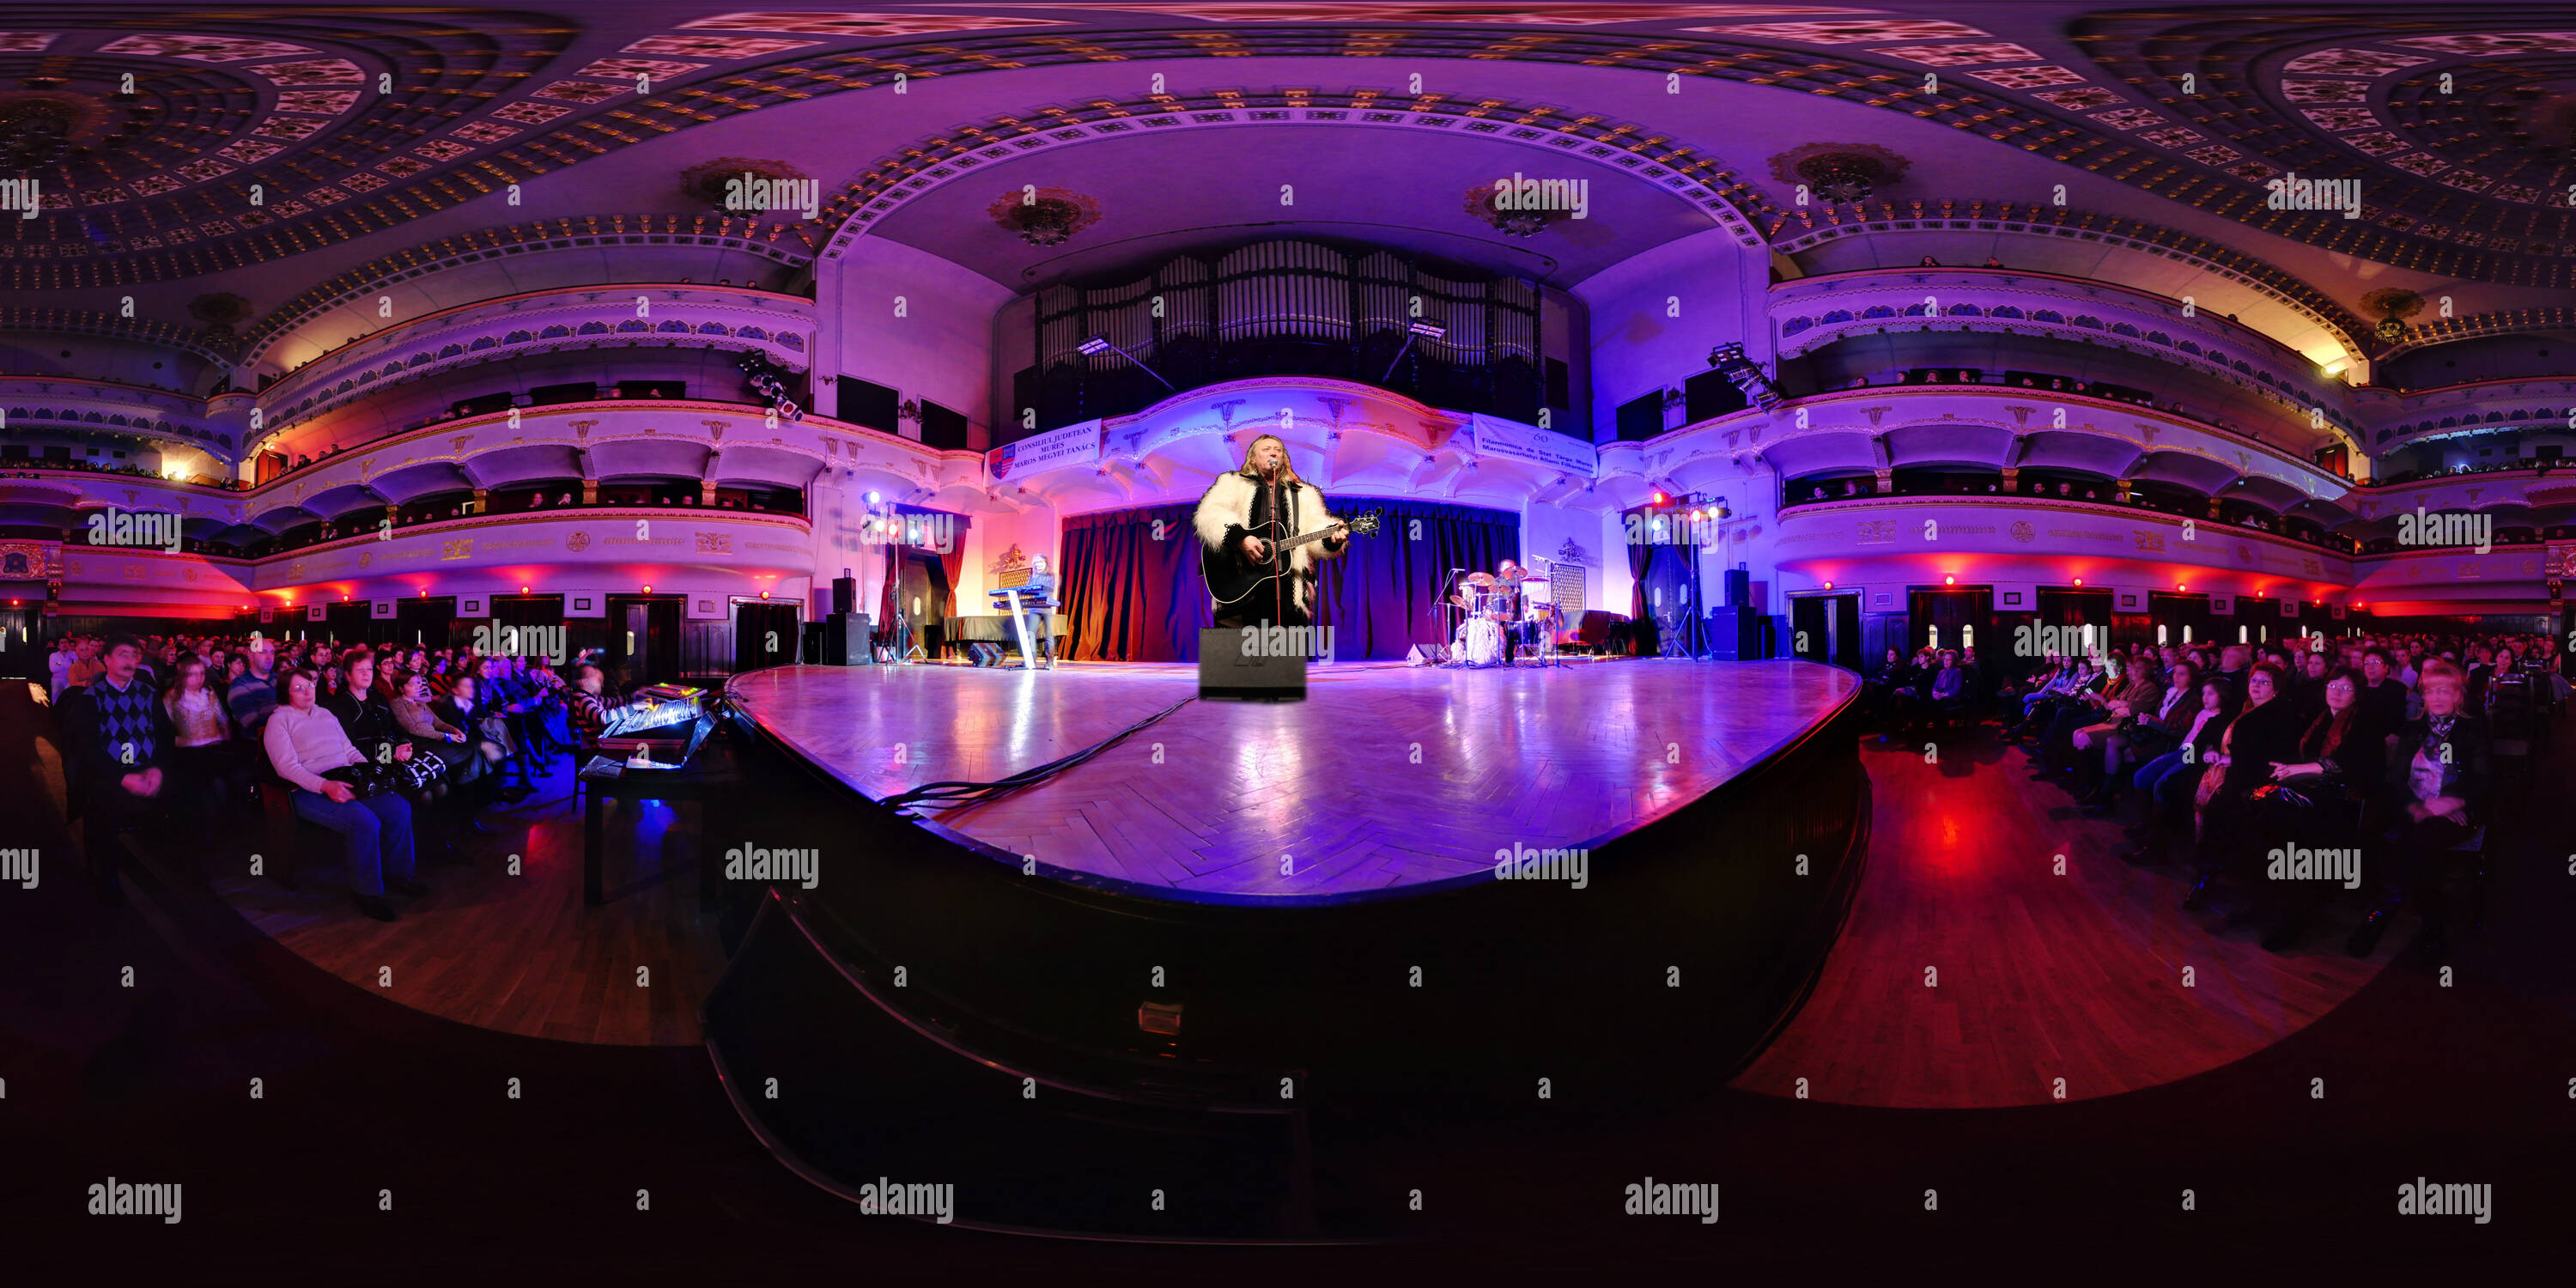 360 degree panoramic view of Stefan Hrusca, Romania's most known carol singer, in concert in Targu Mures